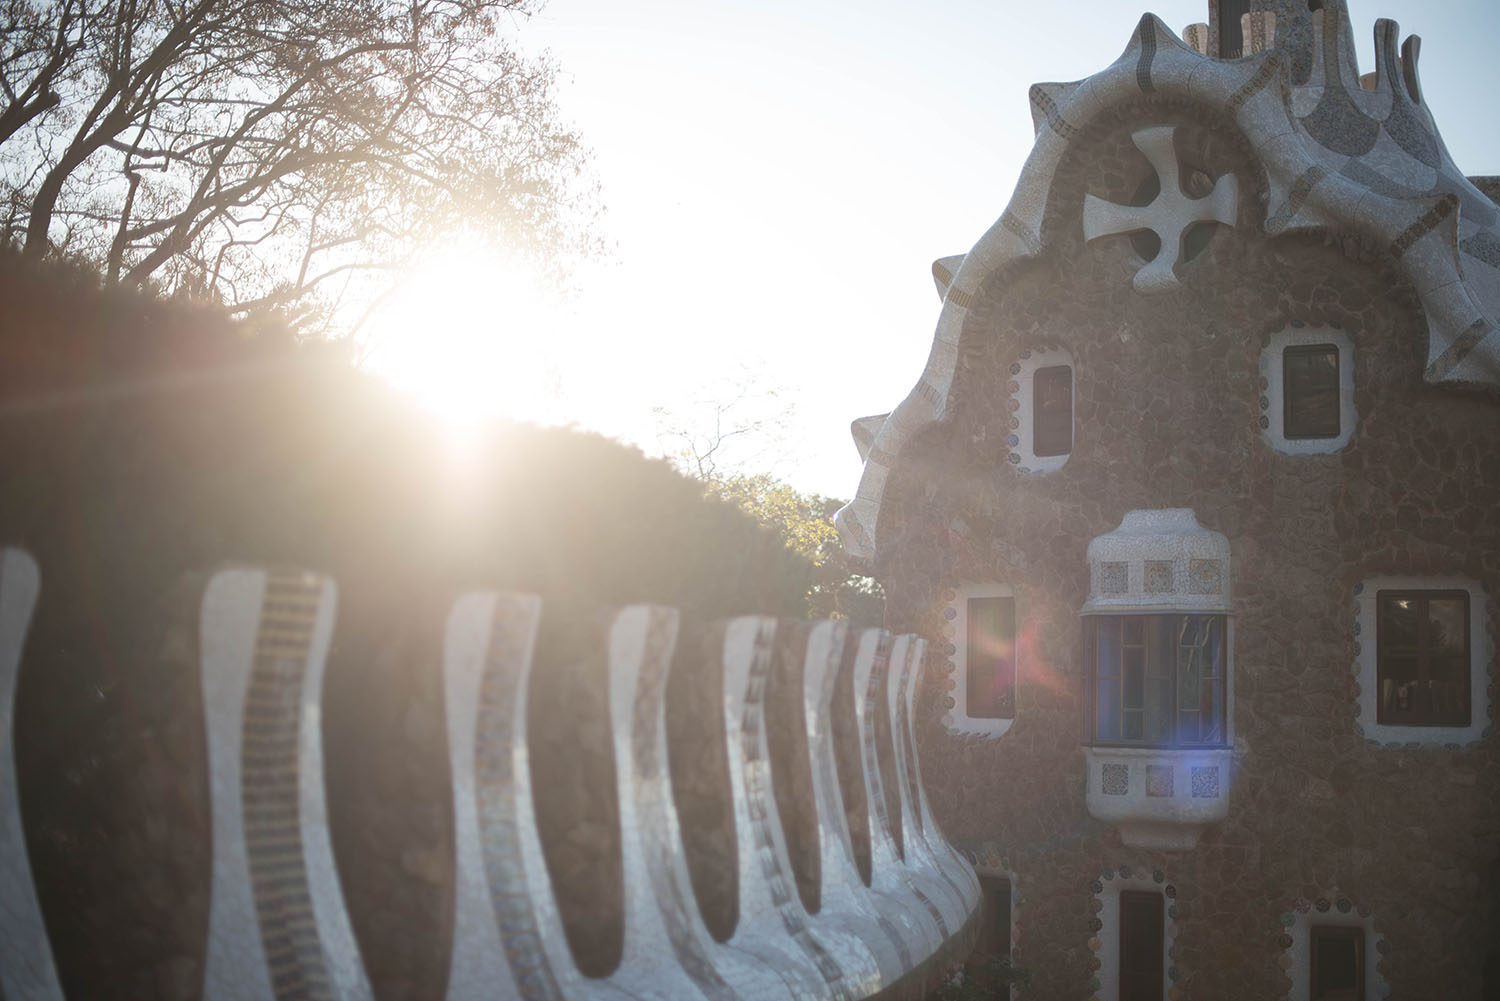 Sunrise flares at Parc Guell in Barcelona, Spain, as captured by Canadian travel blogger Cee Fardoe of Coco & Vera